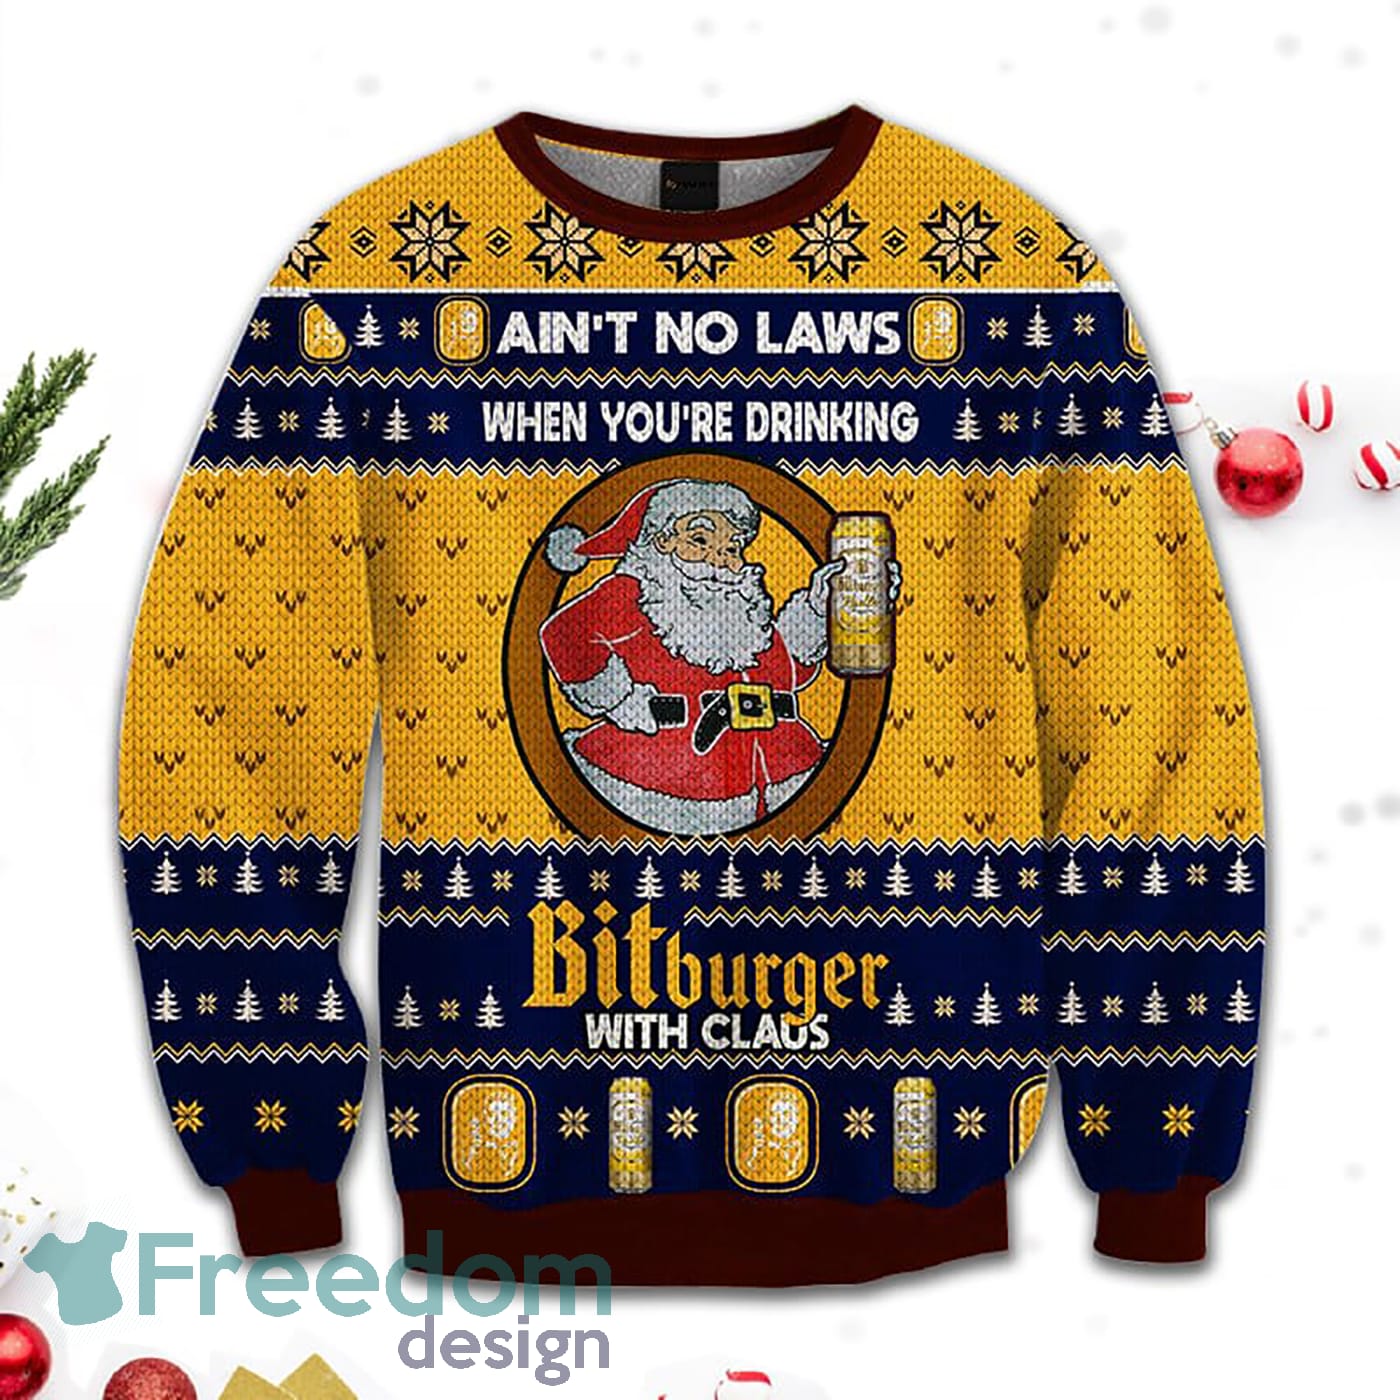 Merr Christmas Ain't No Laws When You Drink Bitburger With Claus Sweatshirt